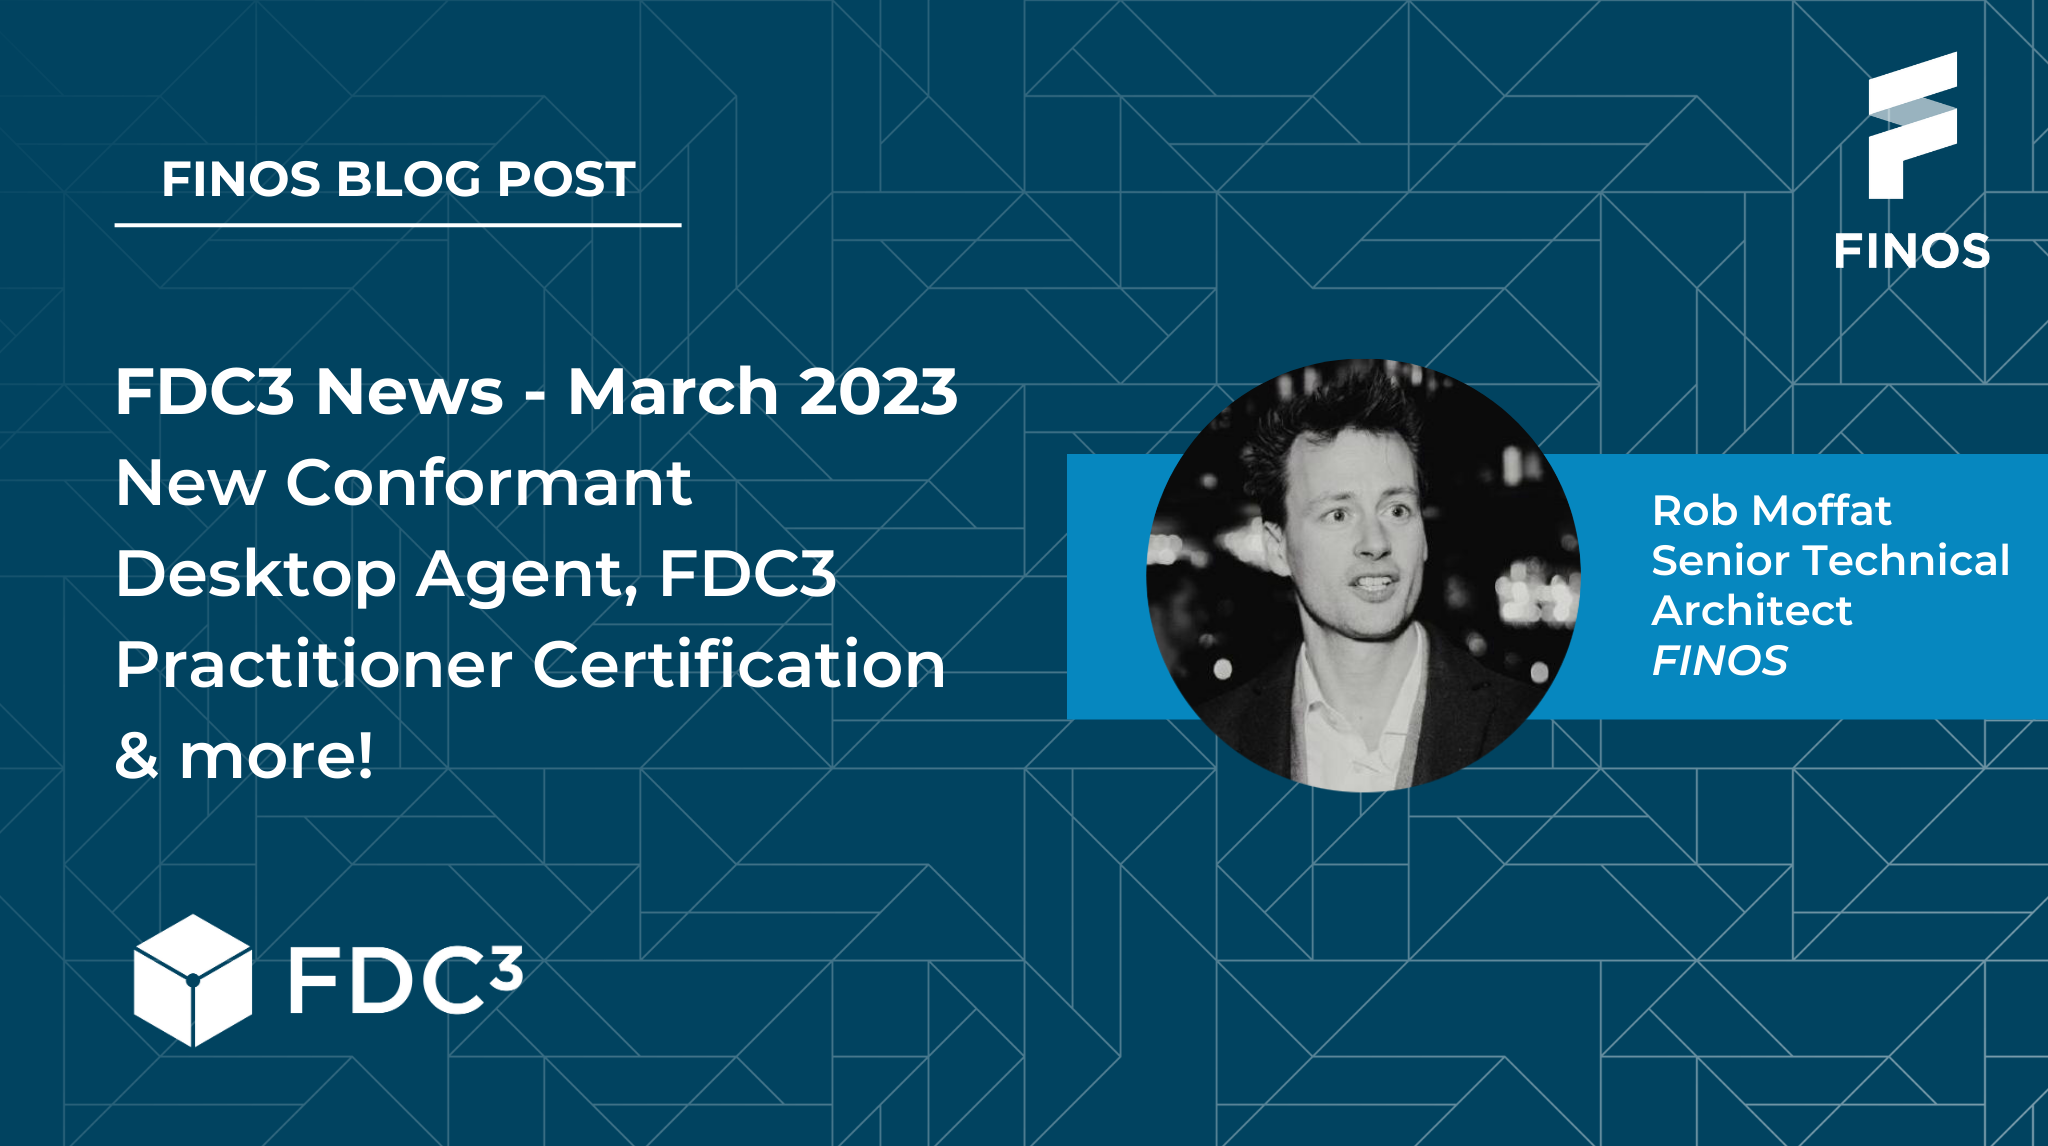 FDC3 News - New Conformant Desktop Agent, FDC3 Practitioner Certification & more! - Rob Moffat